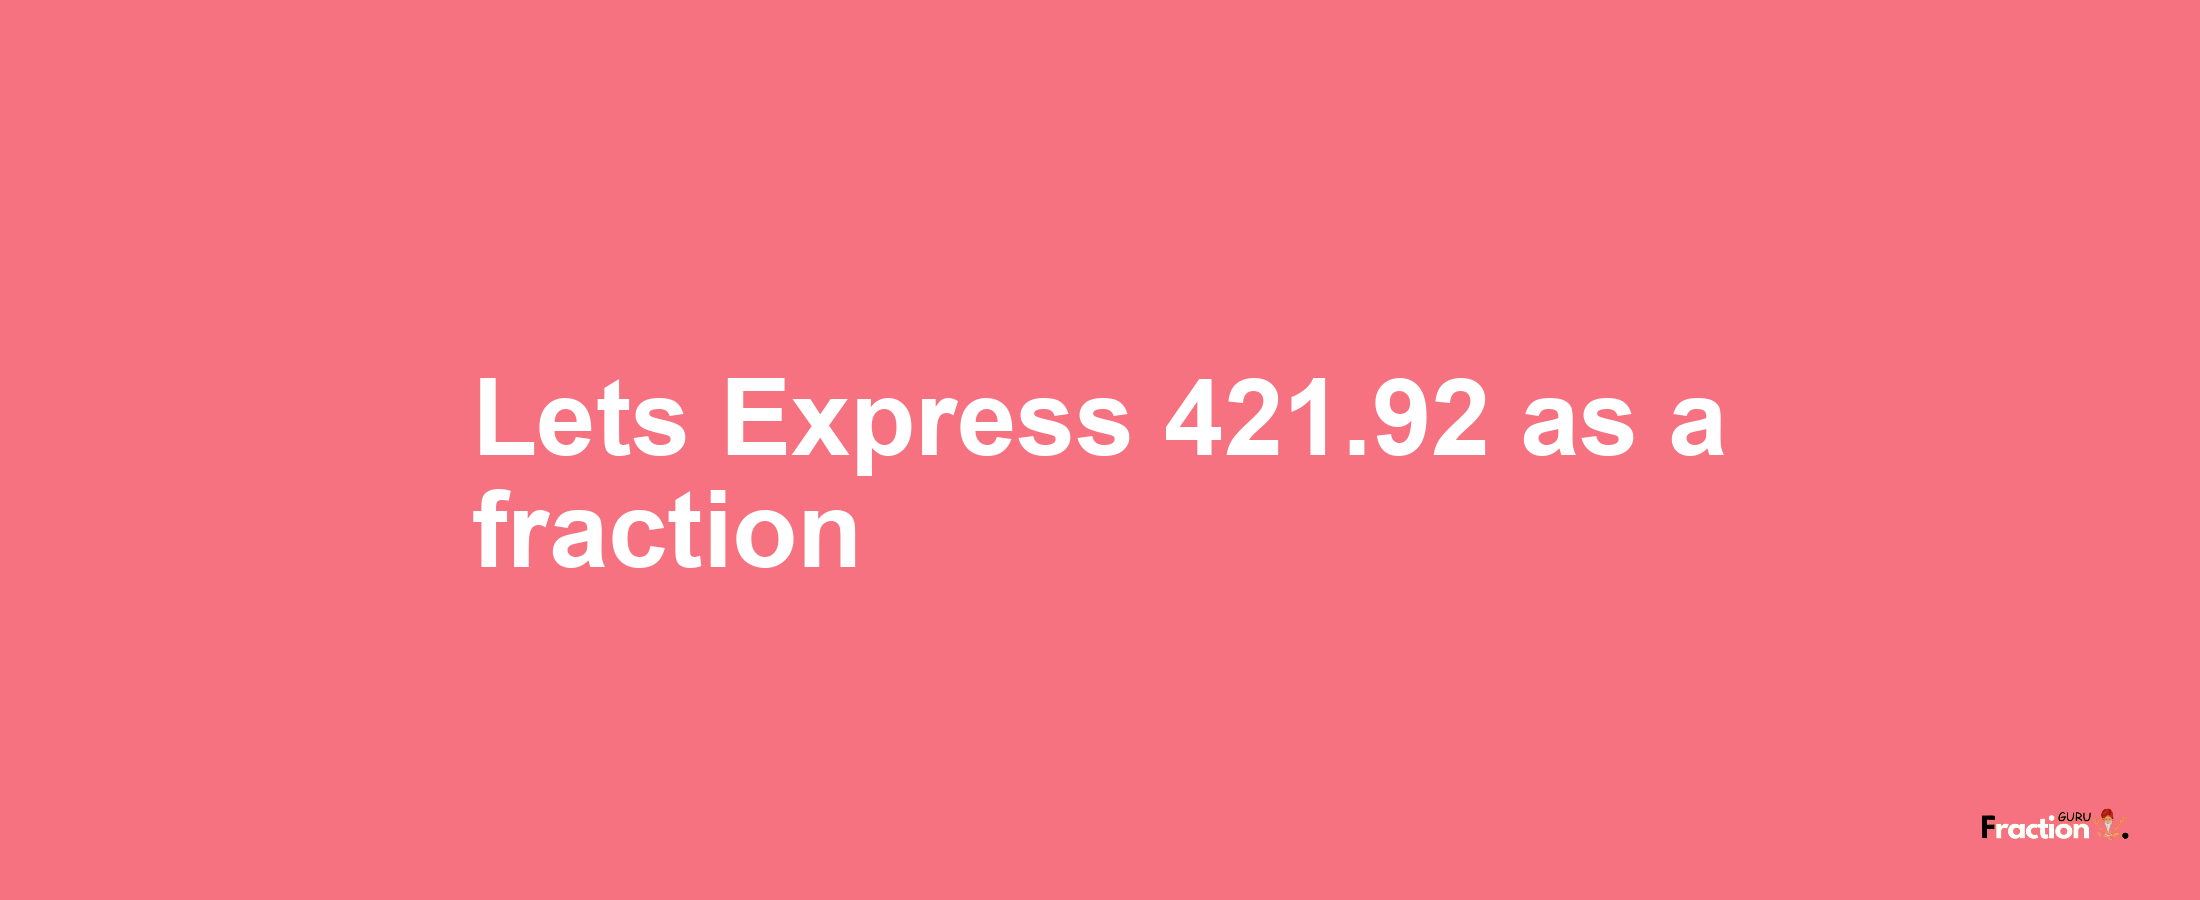 Lets Express 421.92 as afraction